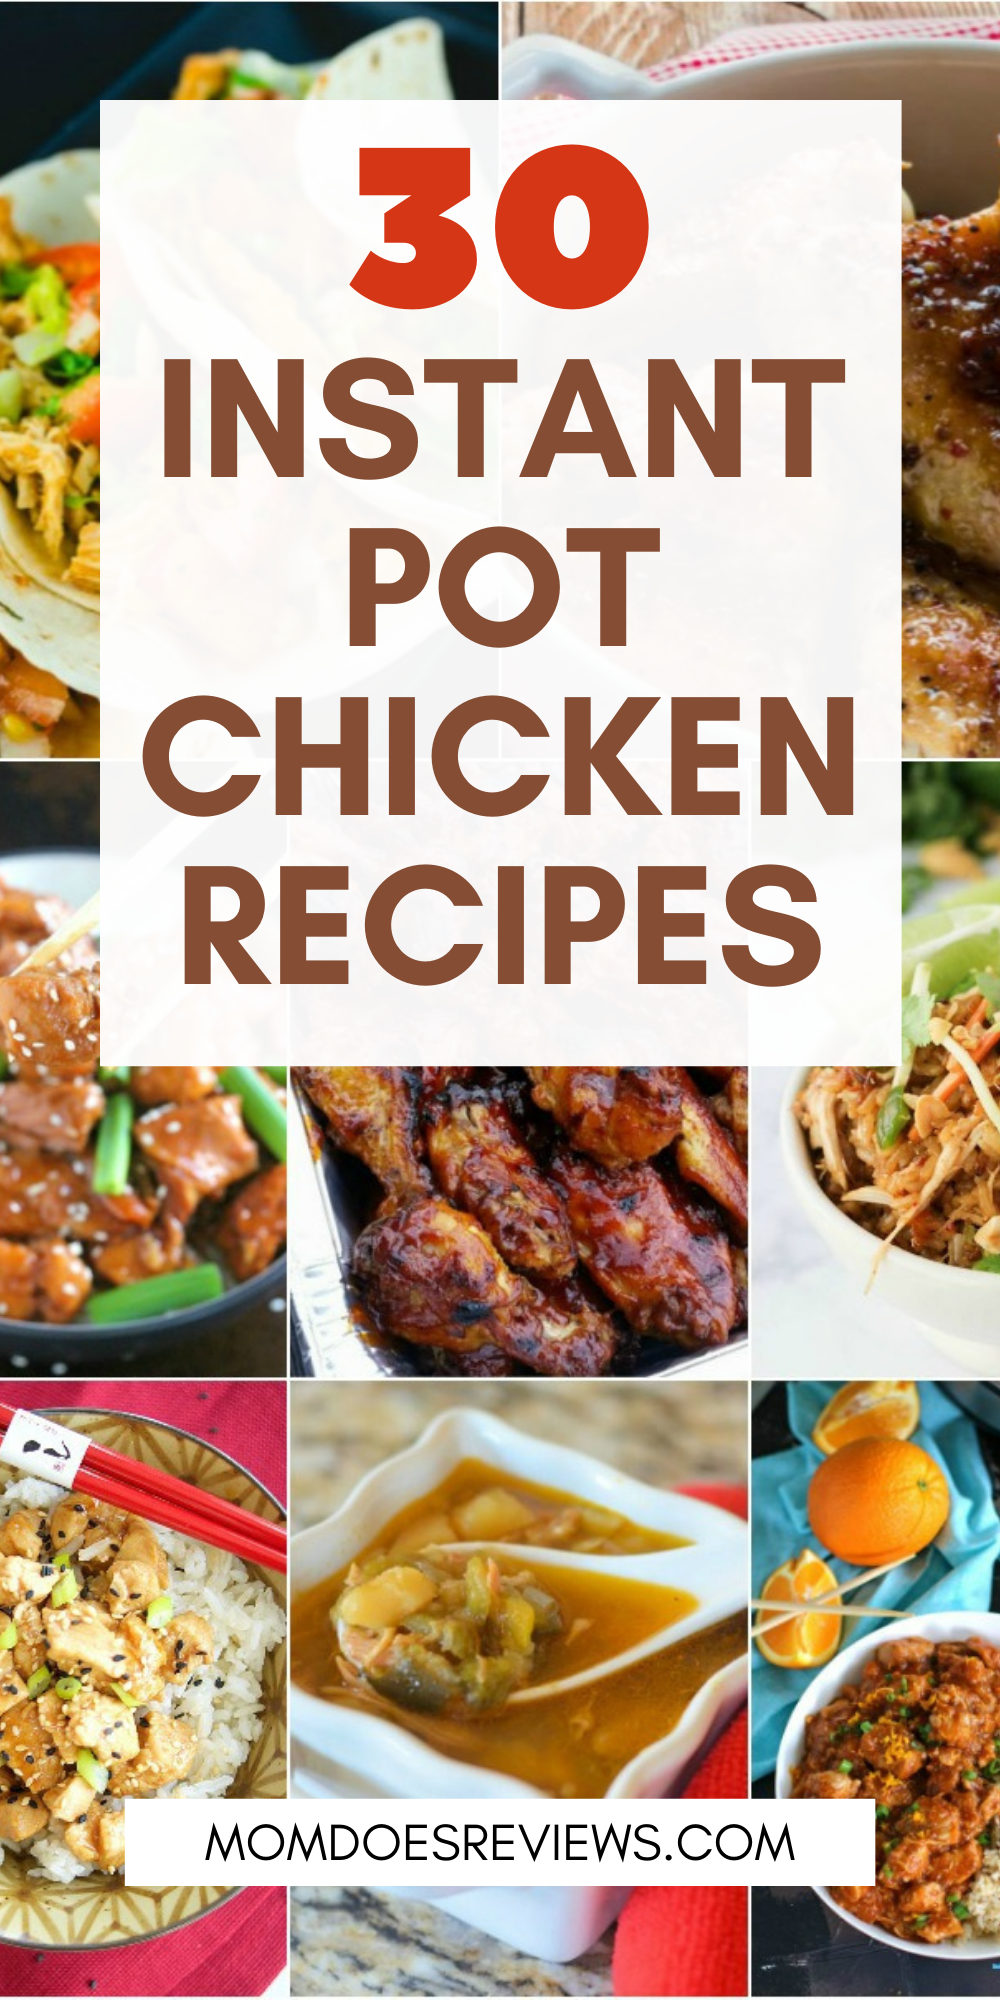 30 Mouth-Watering Instant Pot Chicken #Recipes Perfect for the Family!